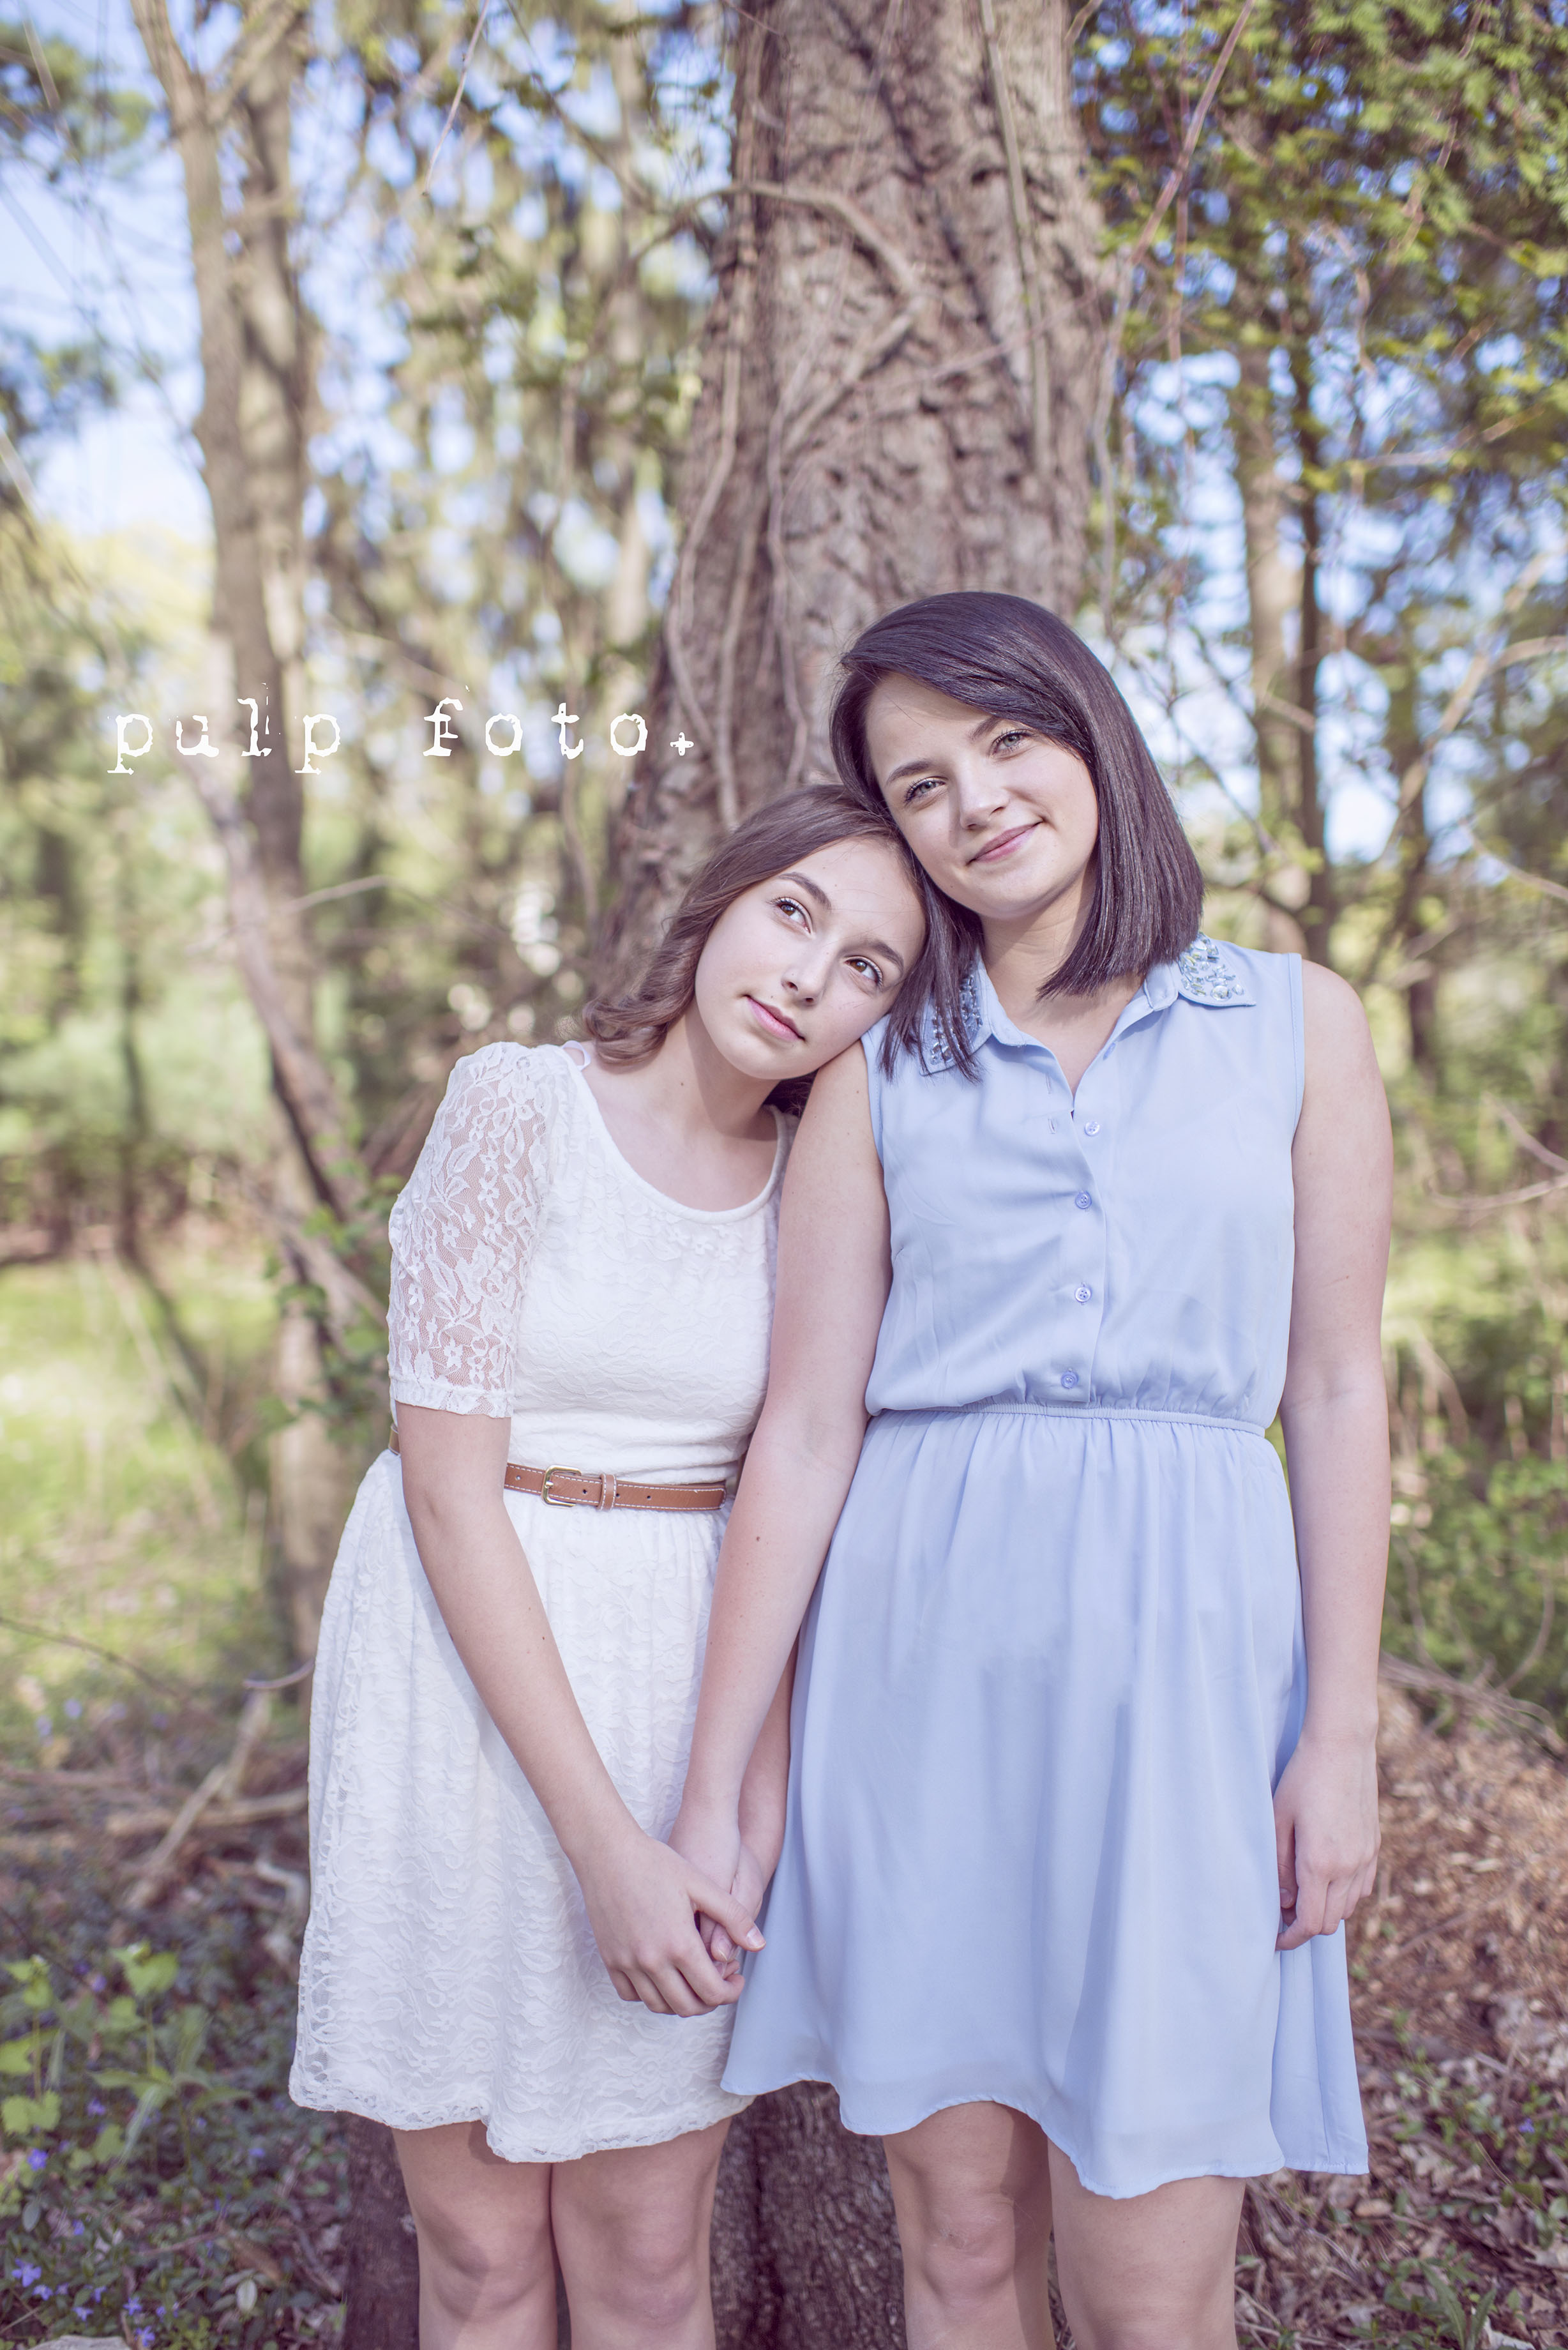 sisters pose. photography pulpfoto.com | Anne Spires Photography ...